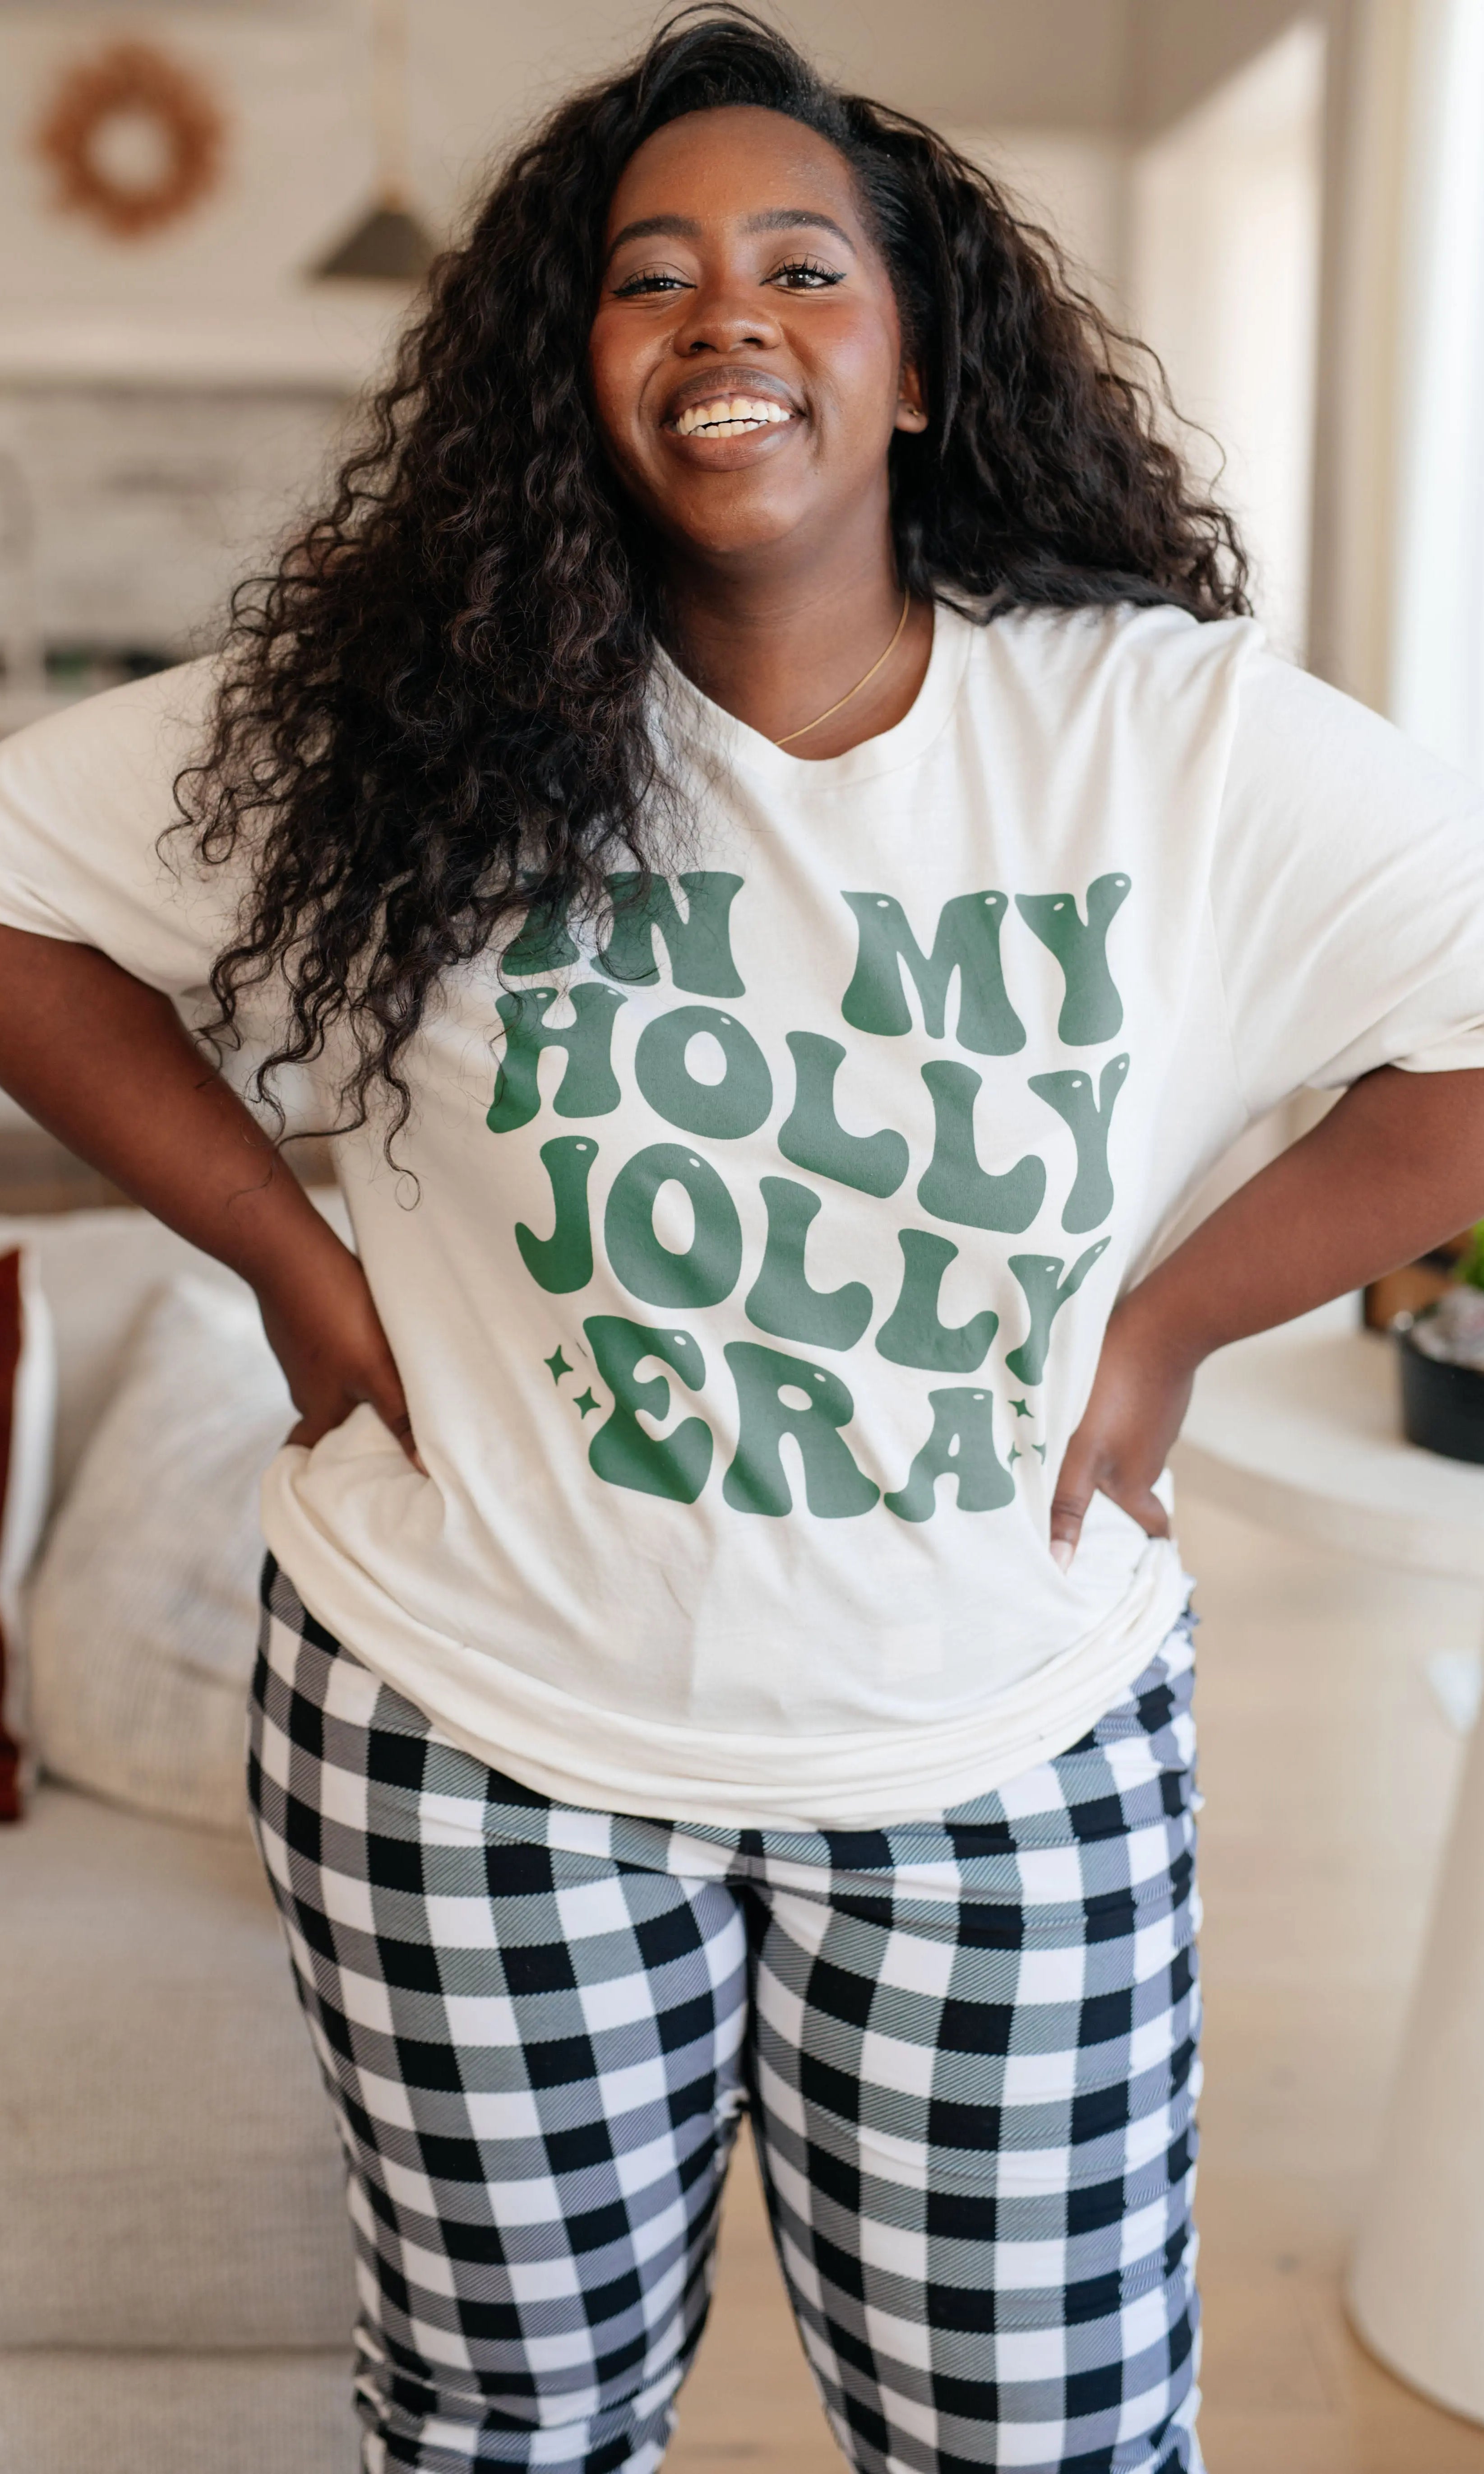 In My Holly Jolly Era Graphic T Ave Shops